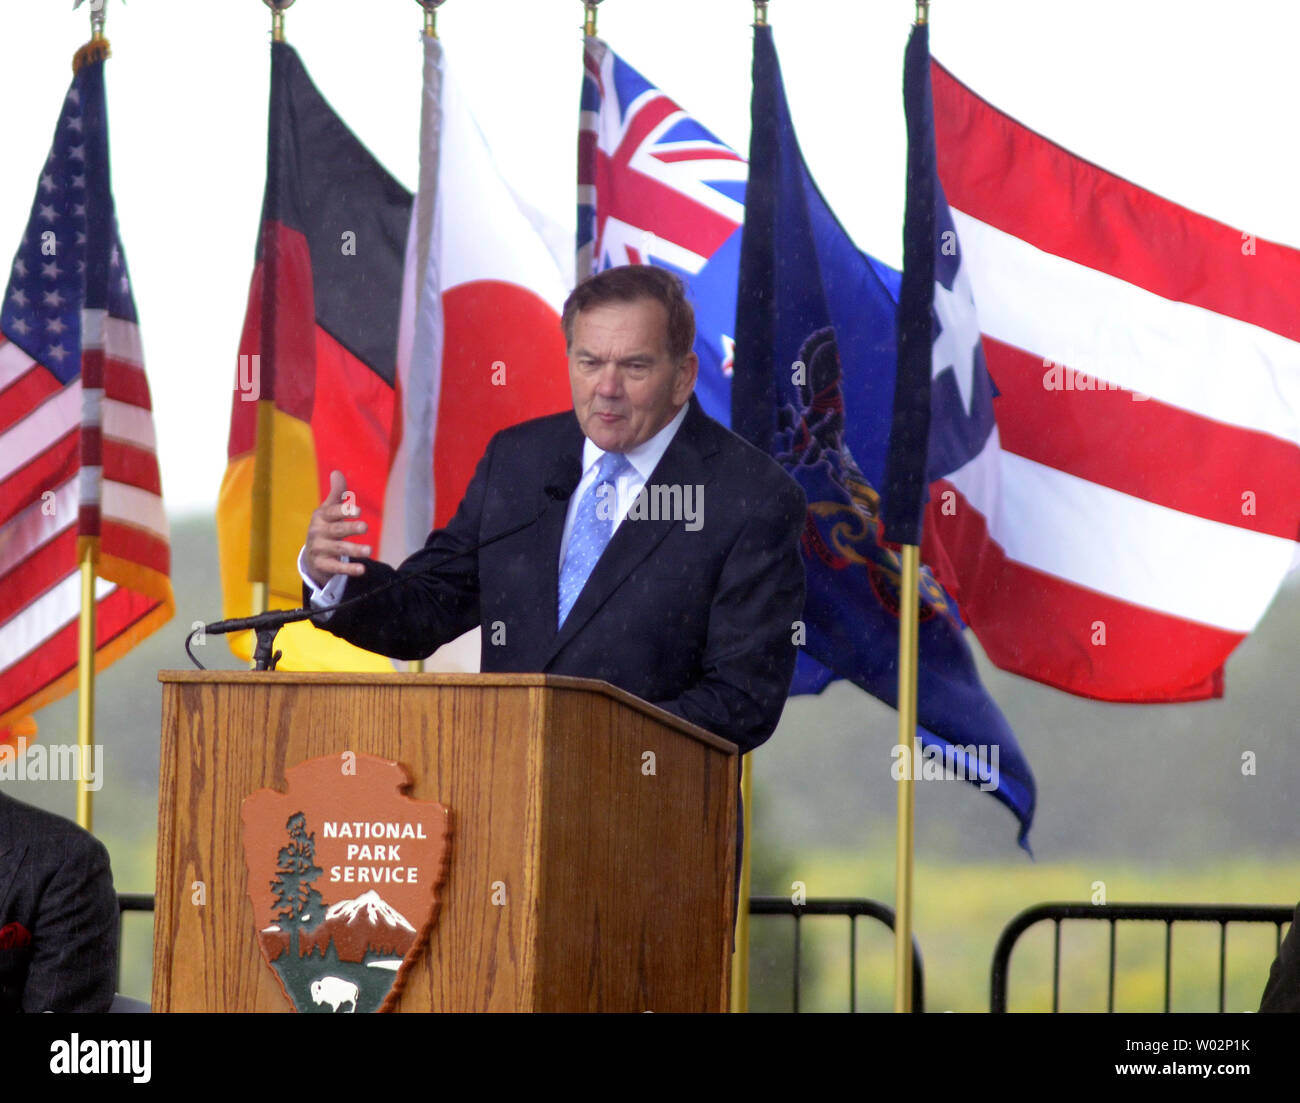 Tom Ridge, first U.S. Secretary of Homeland Security and 43rd Governor of Pennsylvania addresses the family and friends of the victims of Flight 93 at the  'Tower of Voices'  dedication ceremony on September 9, 2018 at the entrance of The Flight 93 Memorial near Shanksville, Pennsylvania.   Photo by Archie Carpenter/UPI Stock Photo